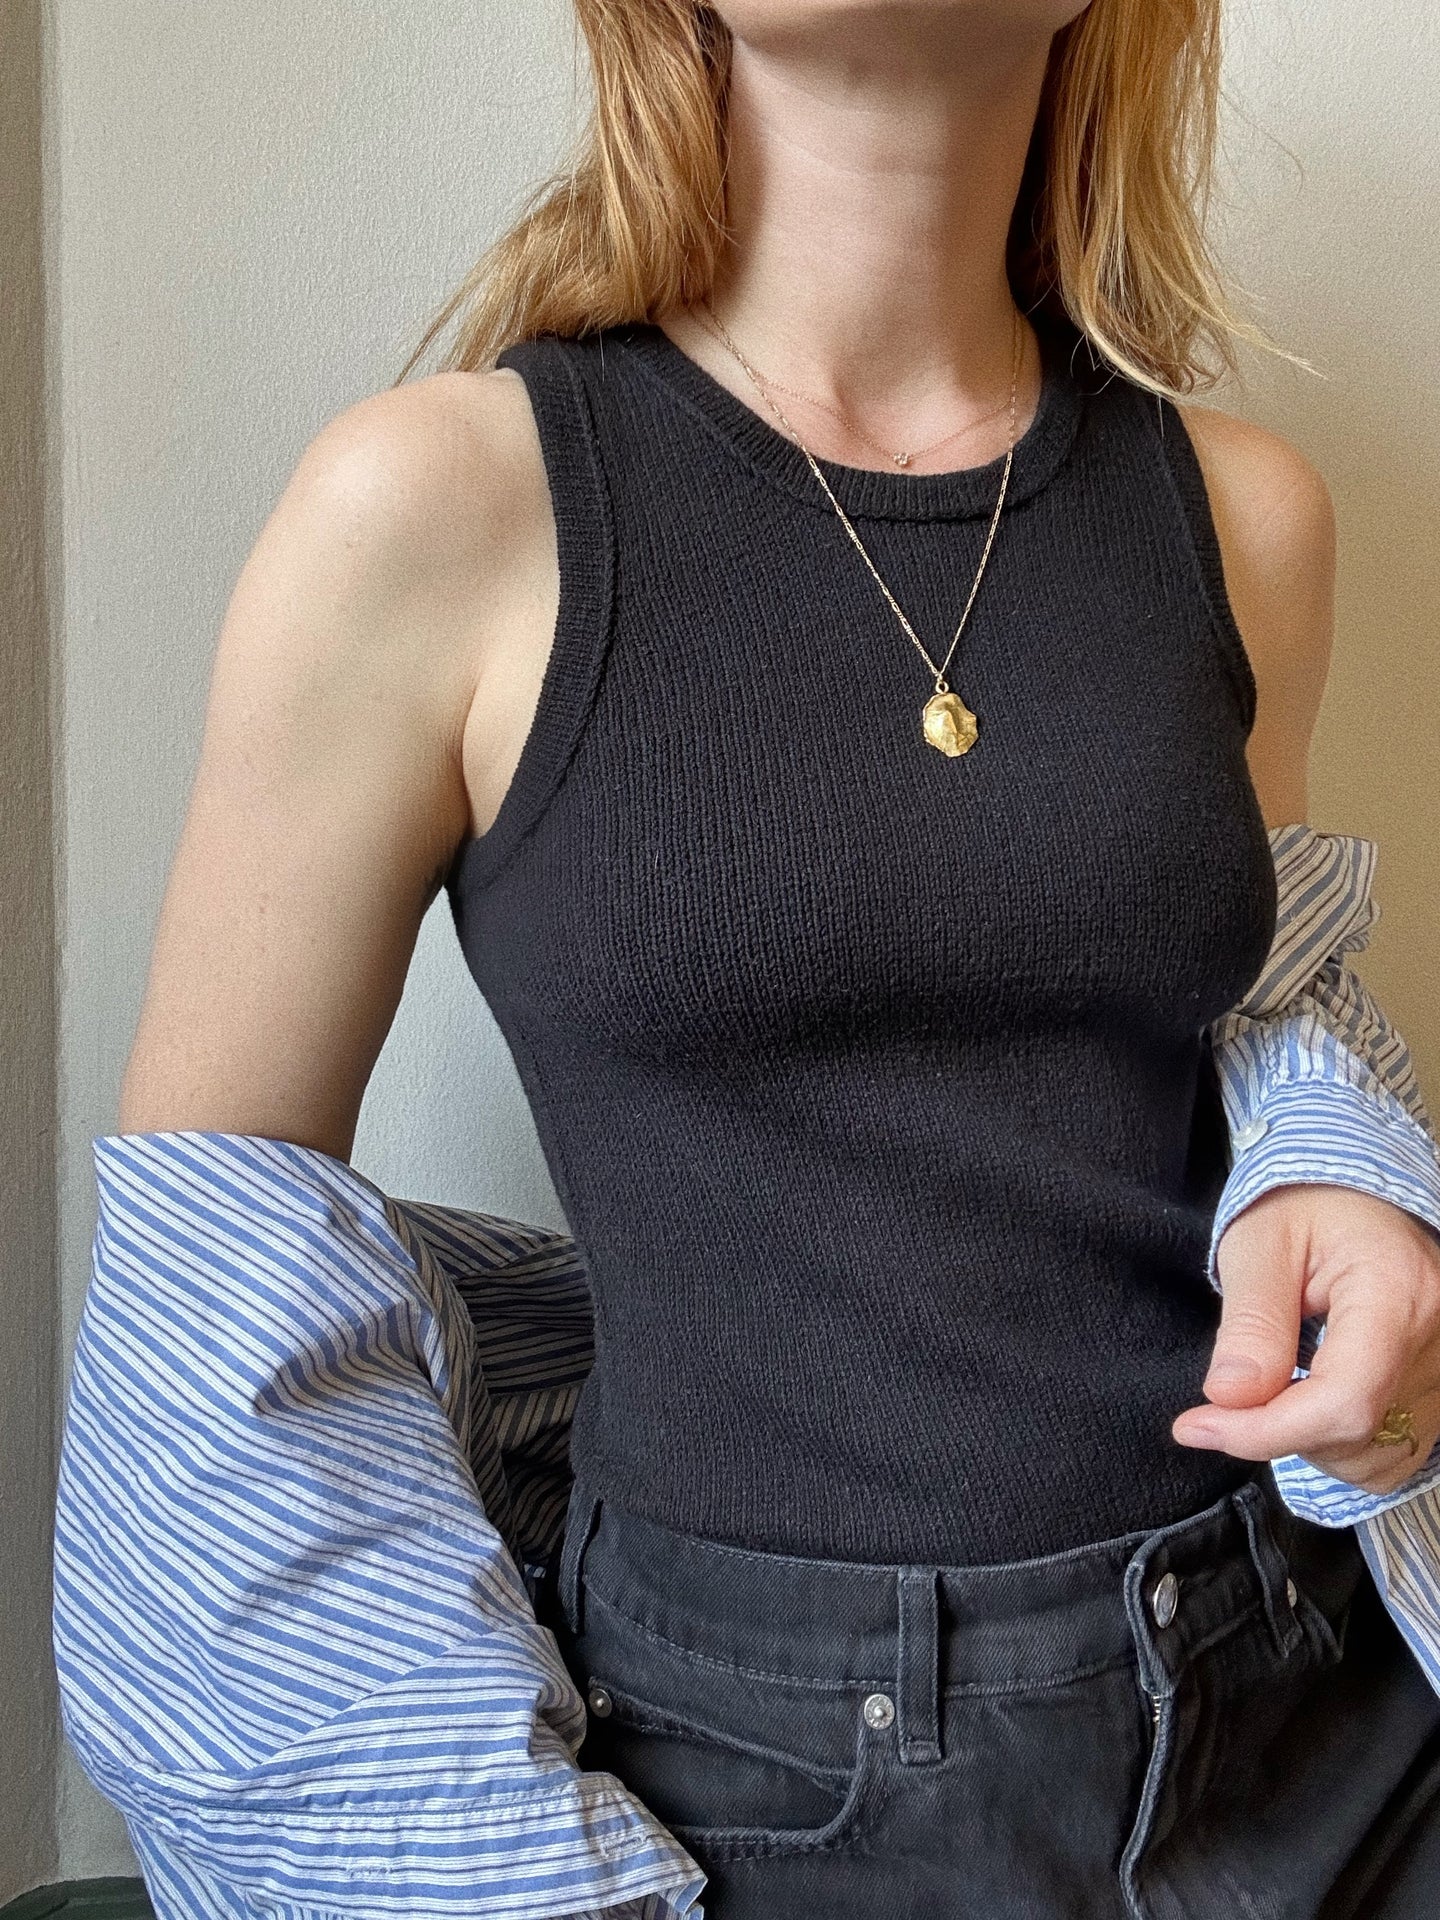 Camisole No. 9 - NORSK